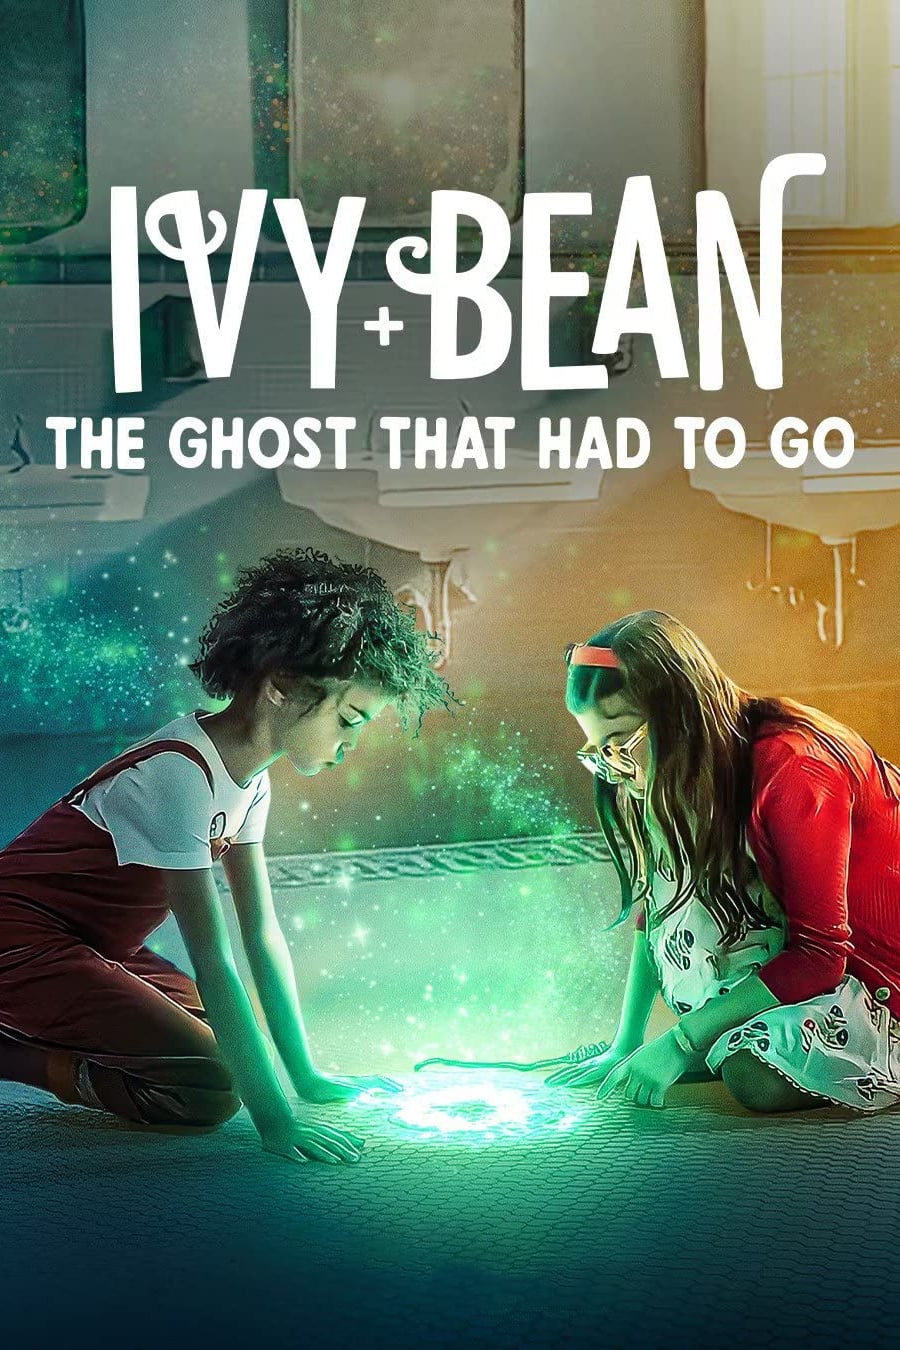 Banner Phim Ivy + Bean: Tống cổ những con ma (Ivy + Bean: The Ghost That Had to Go)